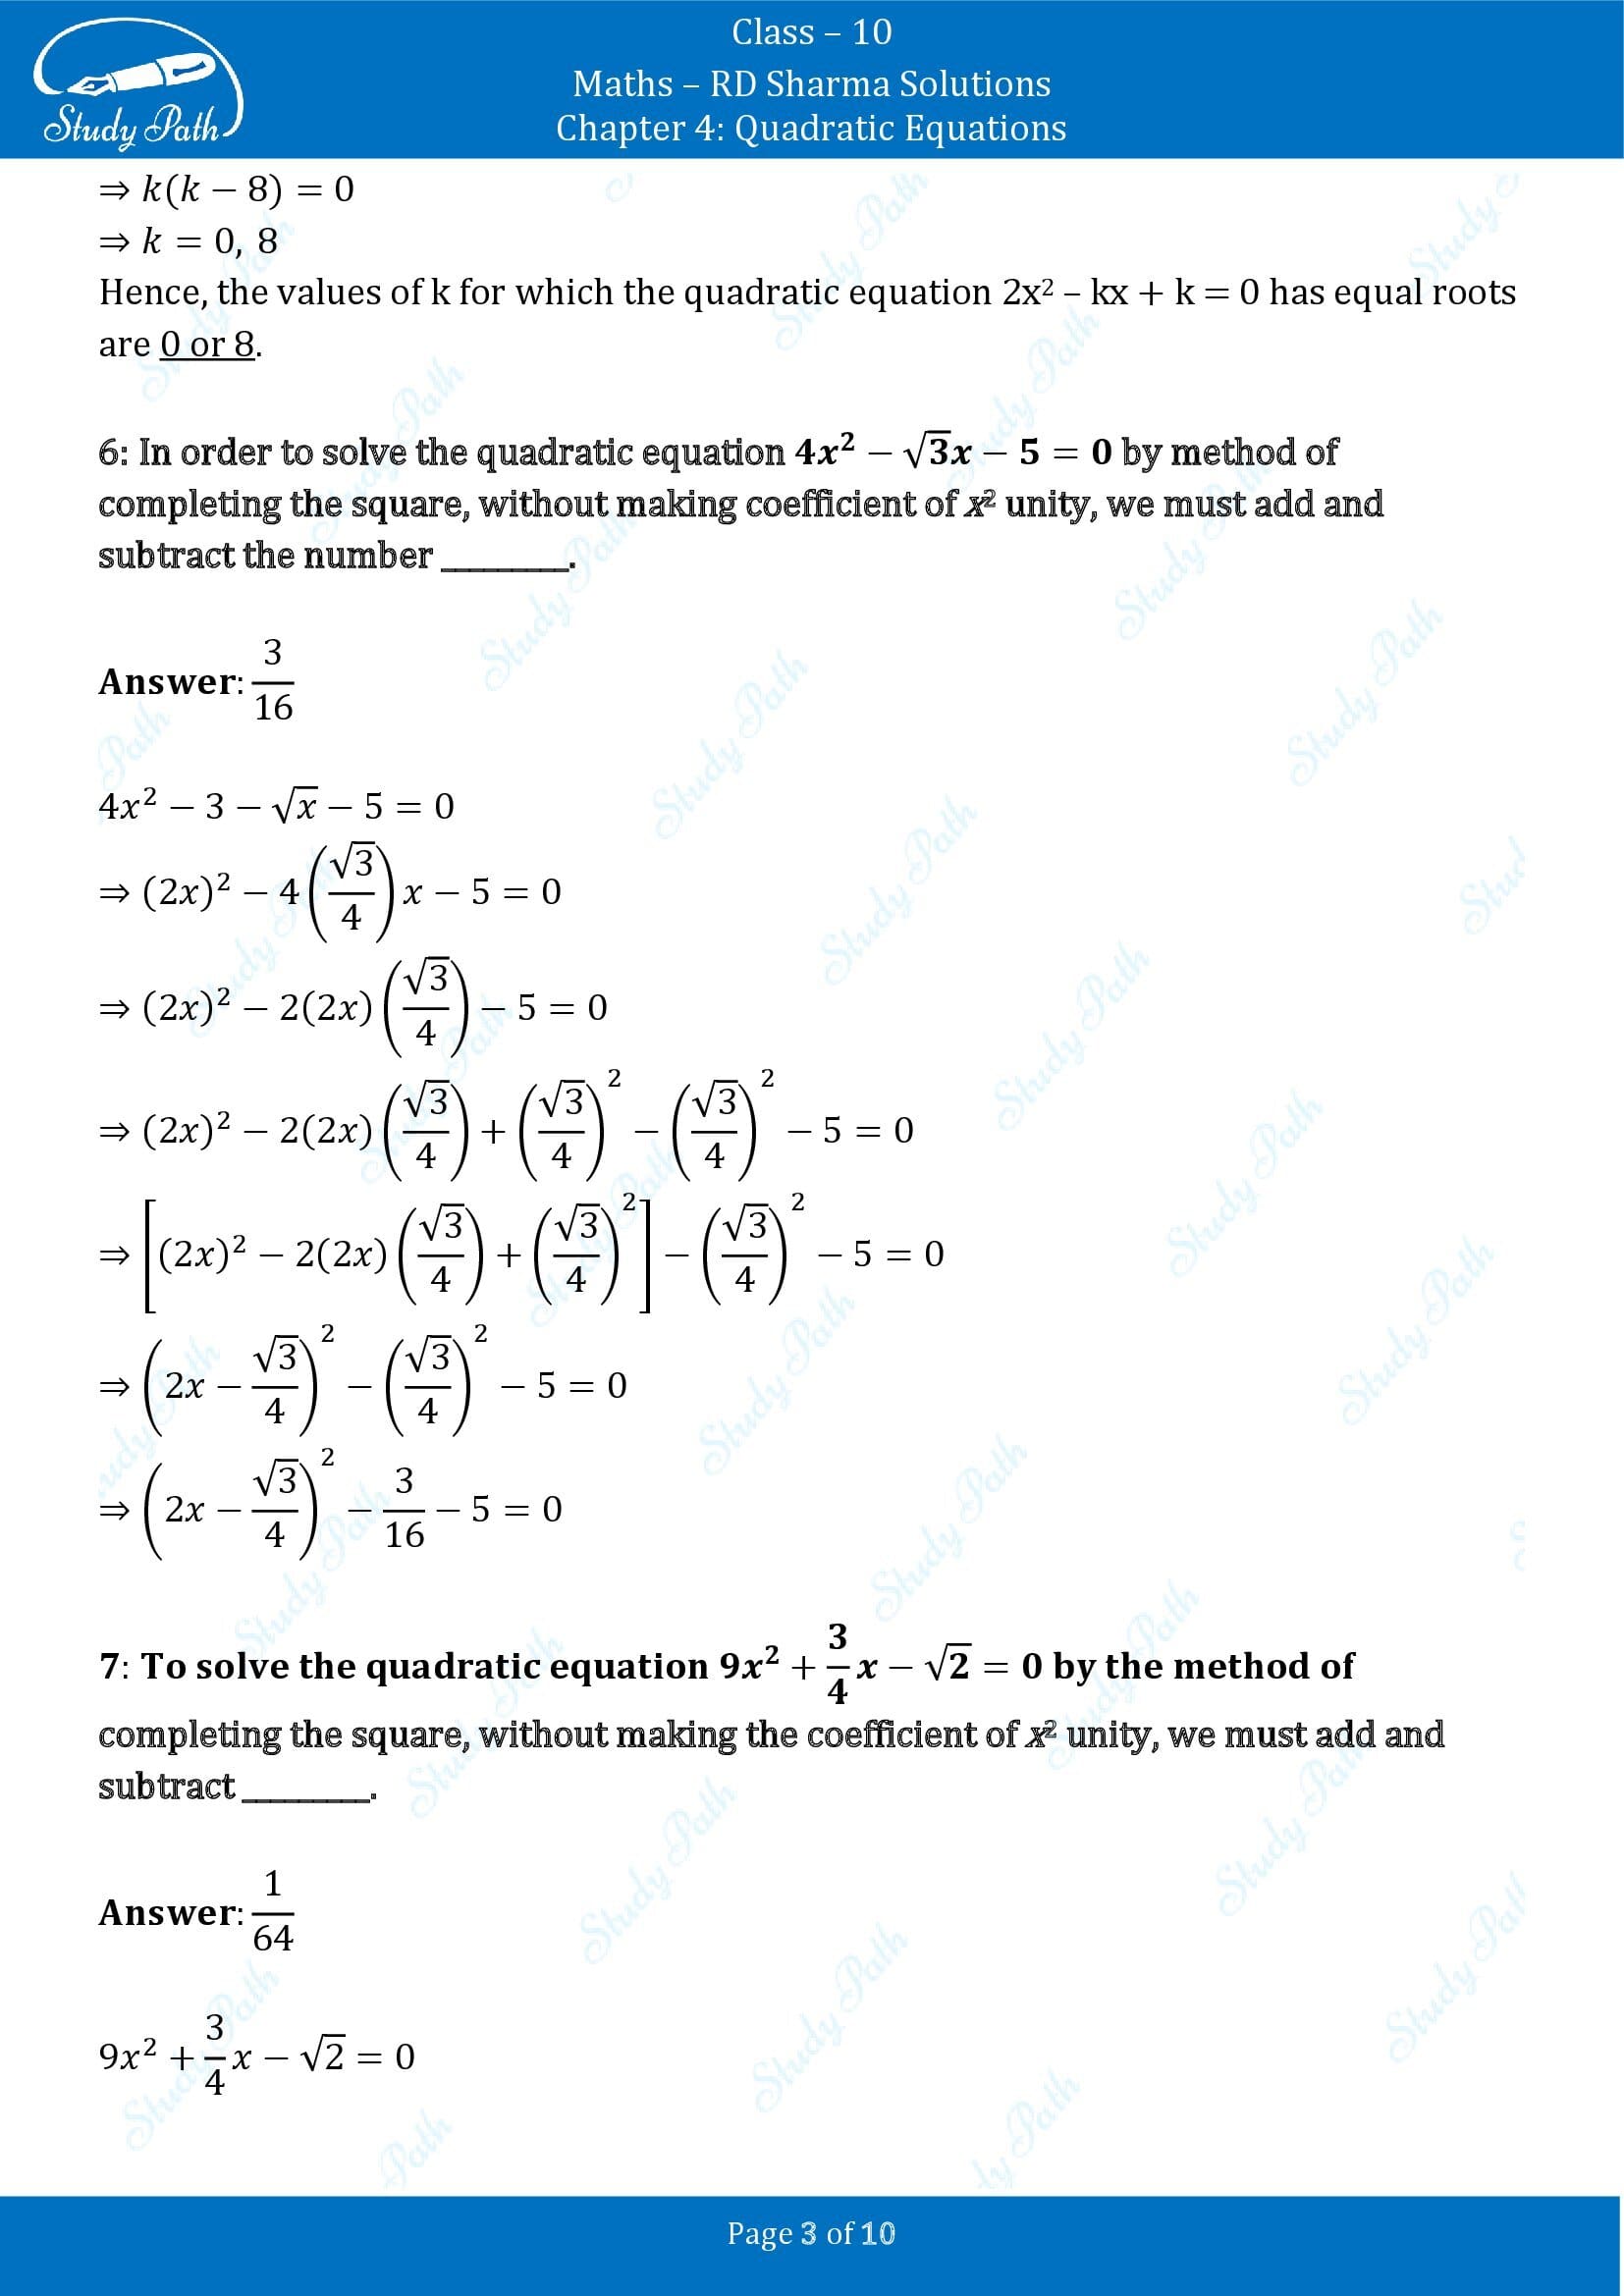 RD Sharma Solutions Class 10 Chapter 4 Quadratic Equations Fill in the Blank Type Questions FBQs 00003